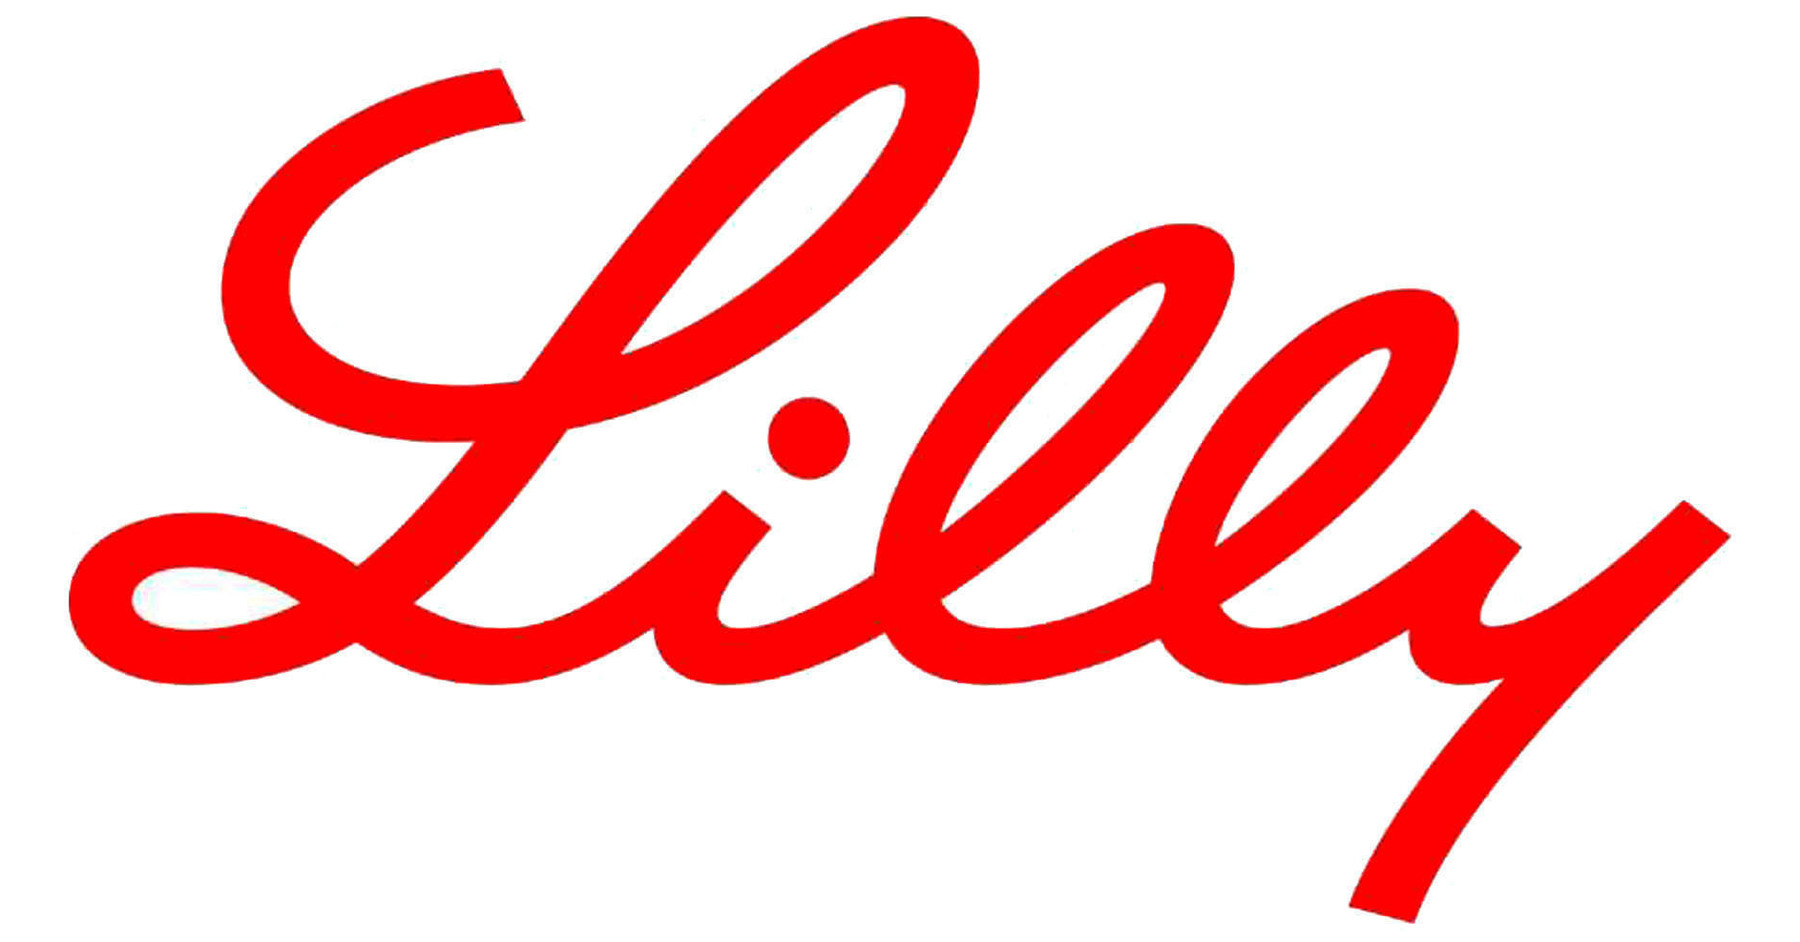 Lilly to expand injectable manufacturing capacity with planned $2.5 billion site in Germany